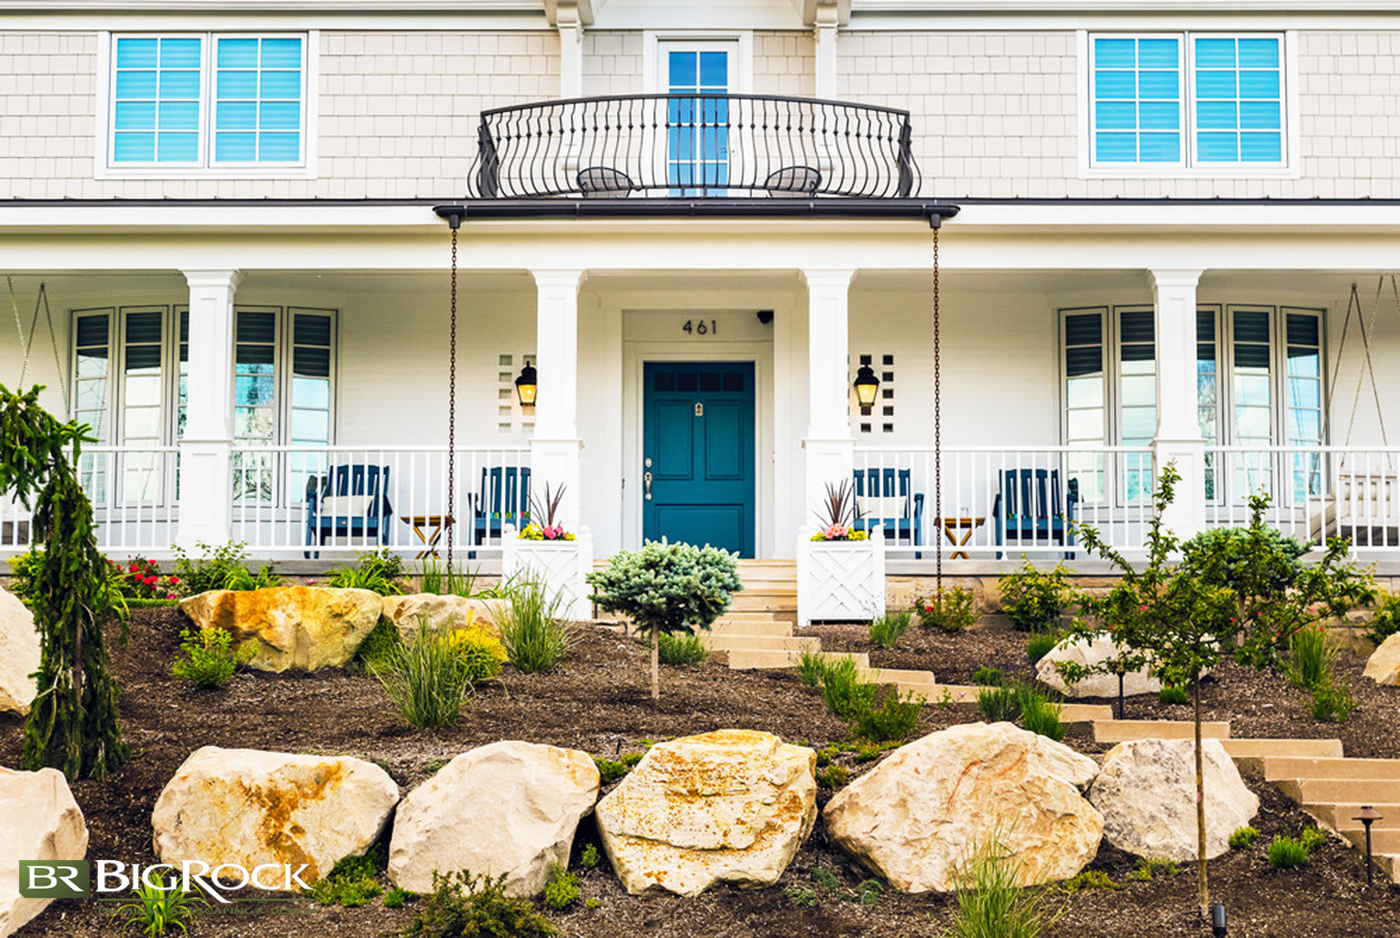 Landscape your home into luxury with premium rock landscaping. Big Rock Landscaping is your premium landscaping designer and will provide high-end installation and landscaping services to meet your luxury landscaping design.